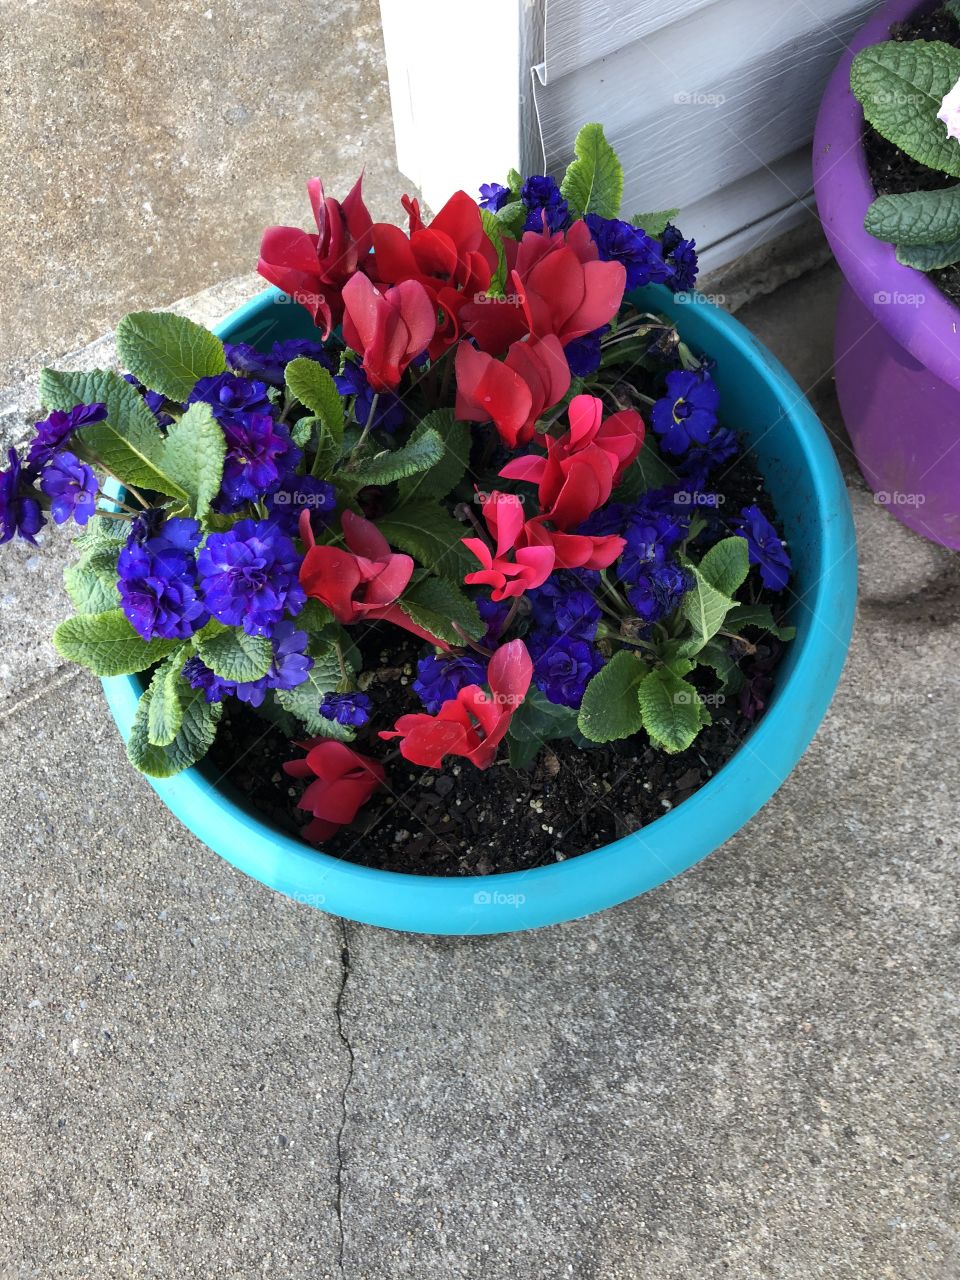 Beautiful pot of flowers blooming in the spring sun